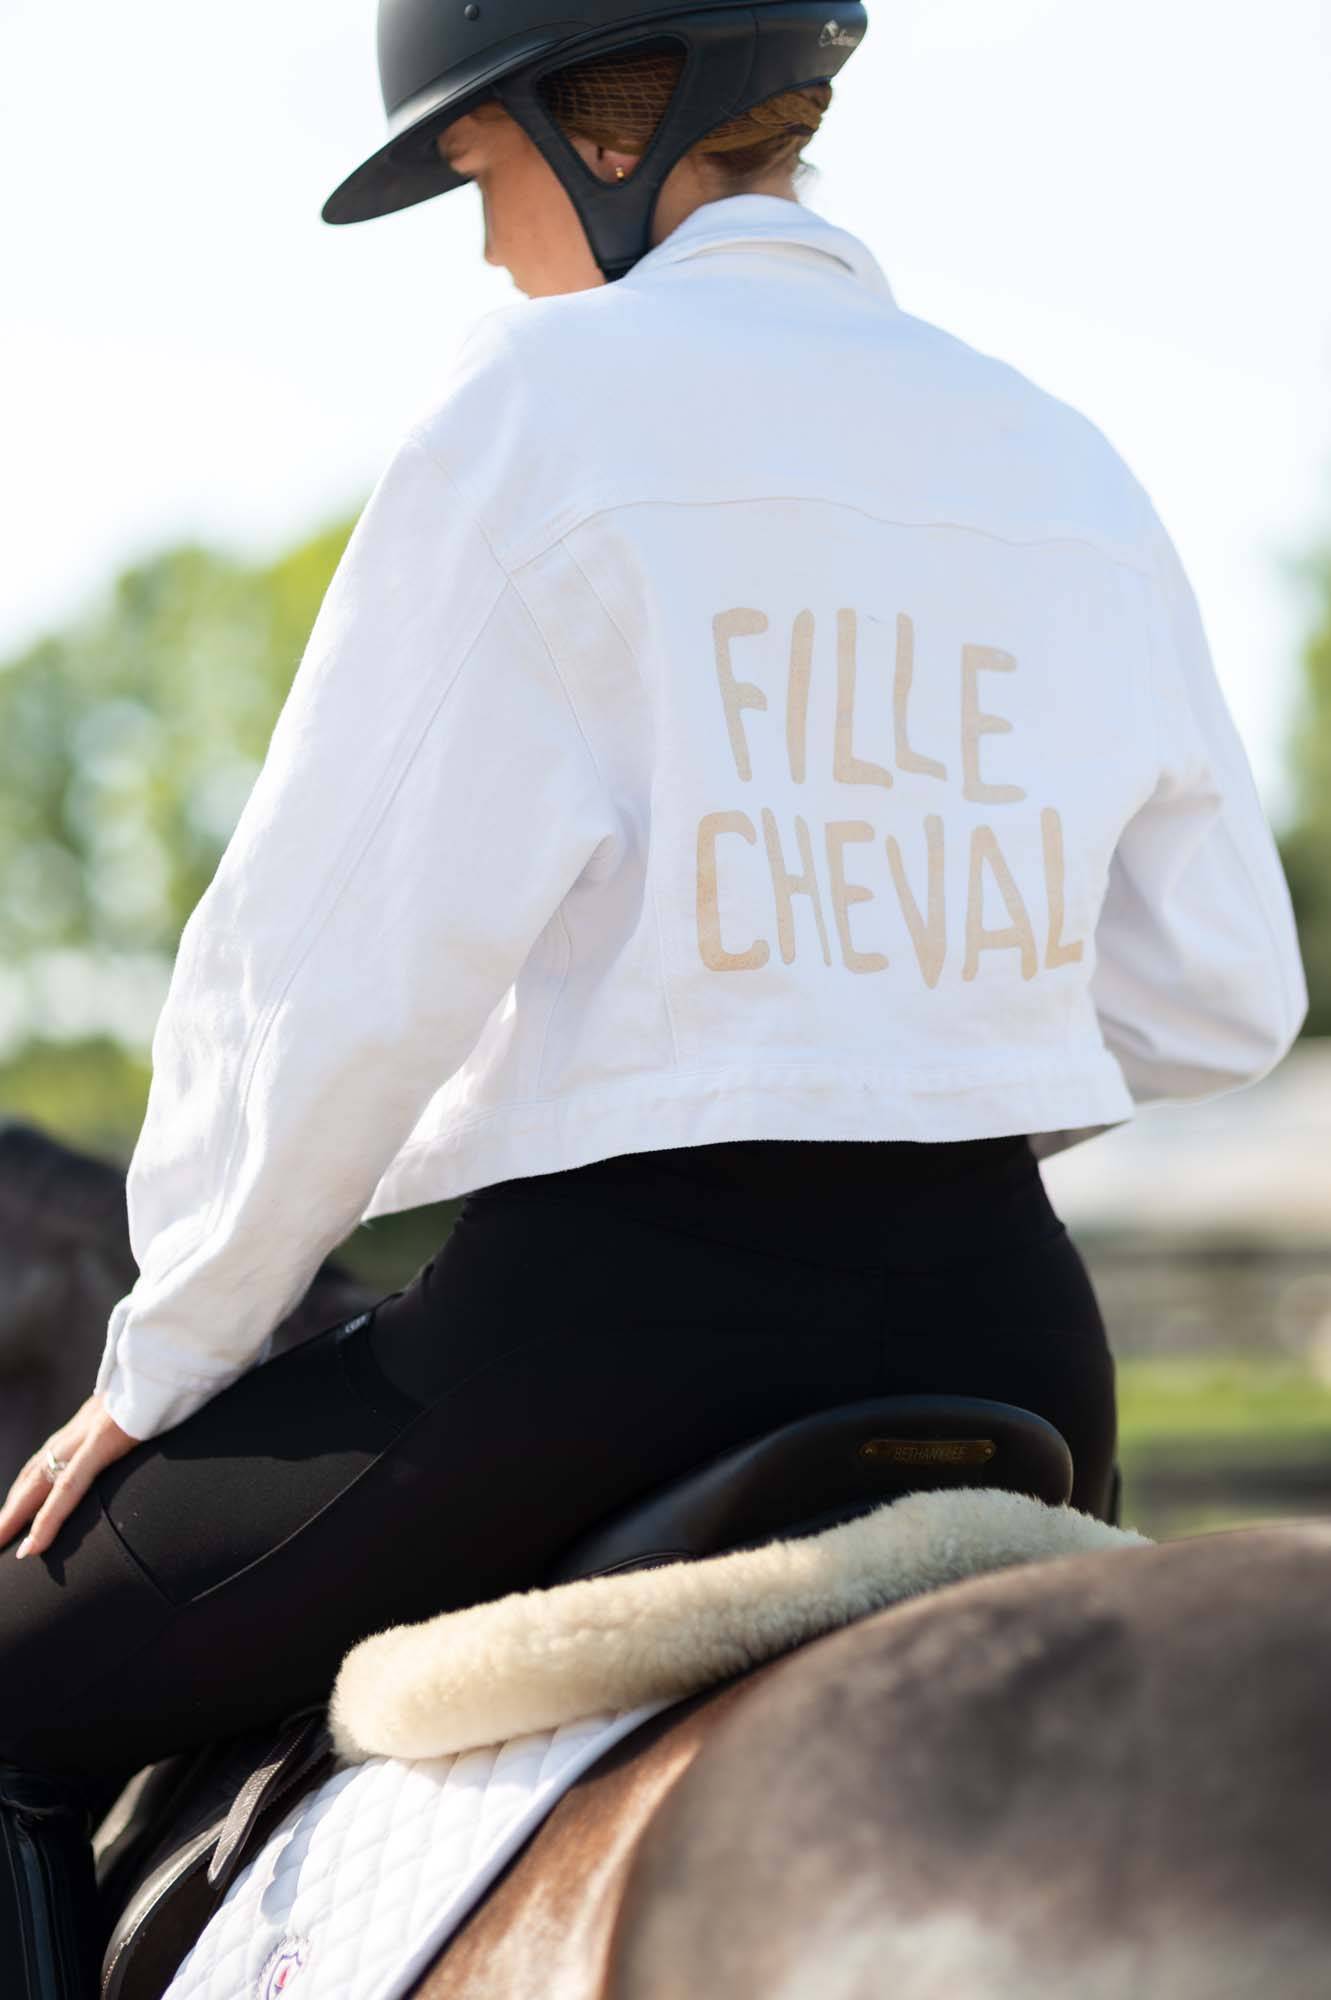 Fille Cheval in Paris – My Equestrian Style